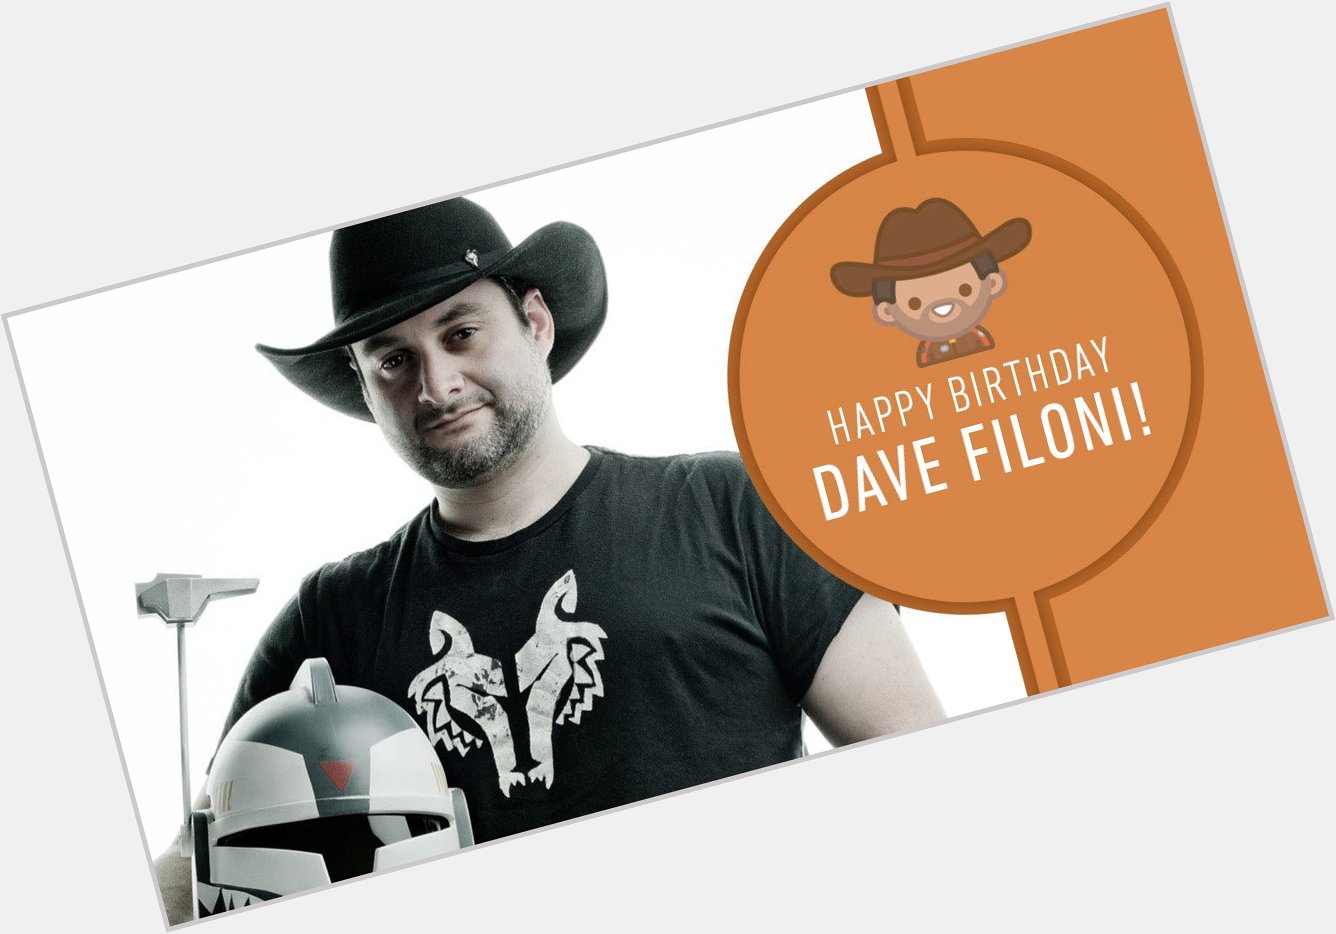 Happy birthday to Dave Filoni, executive producer of Star Wars... 